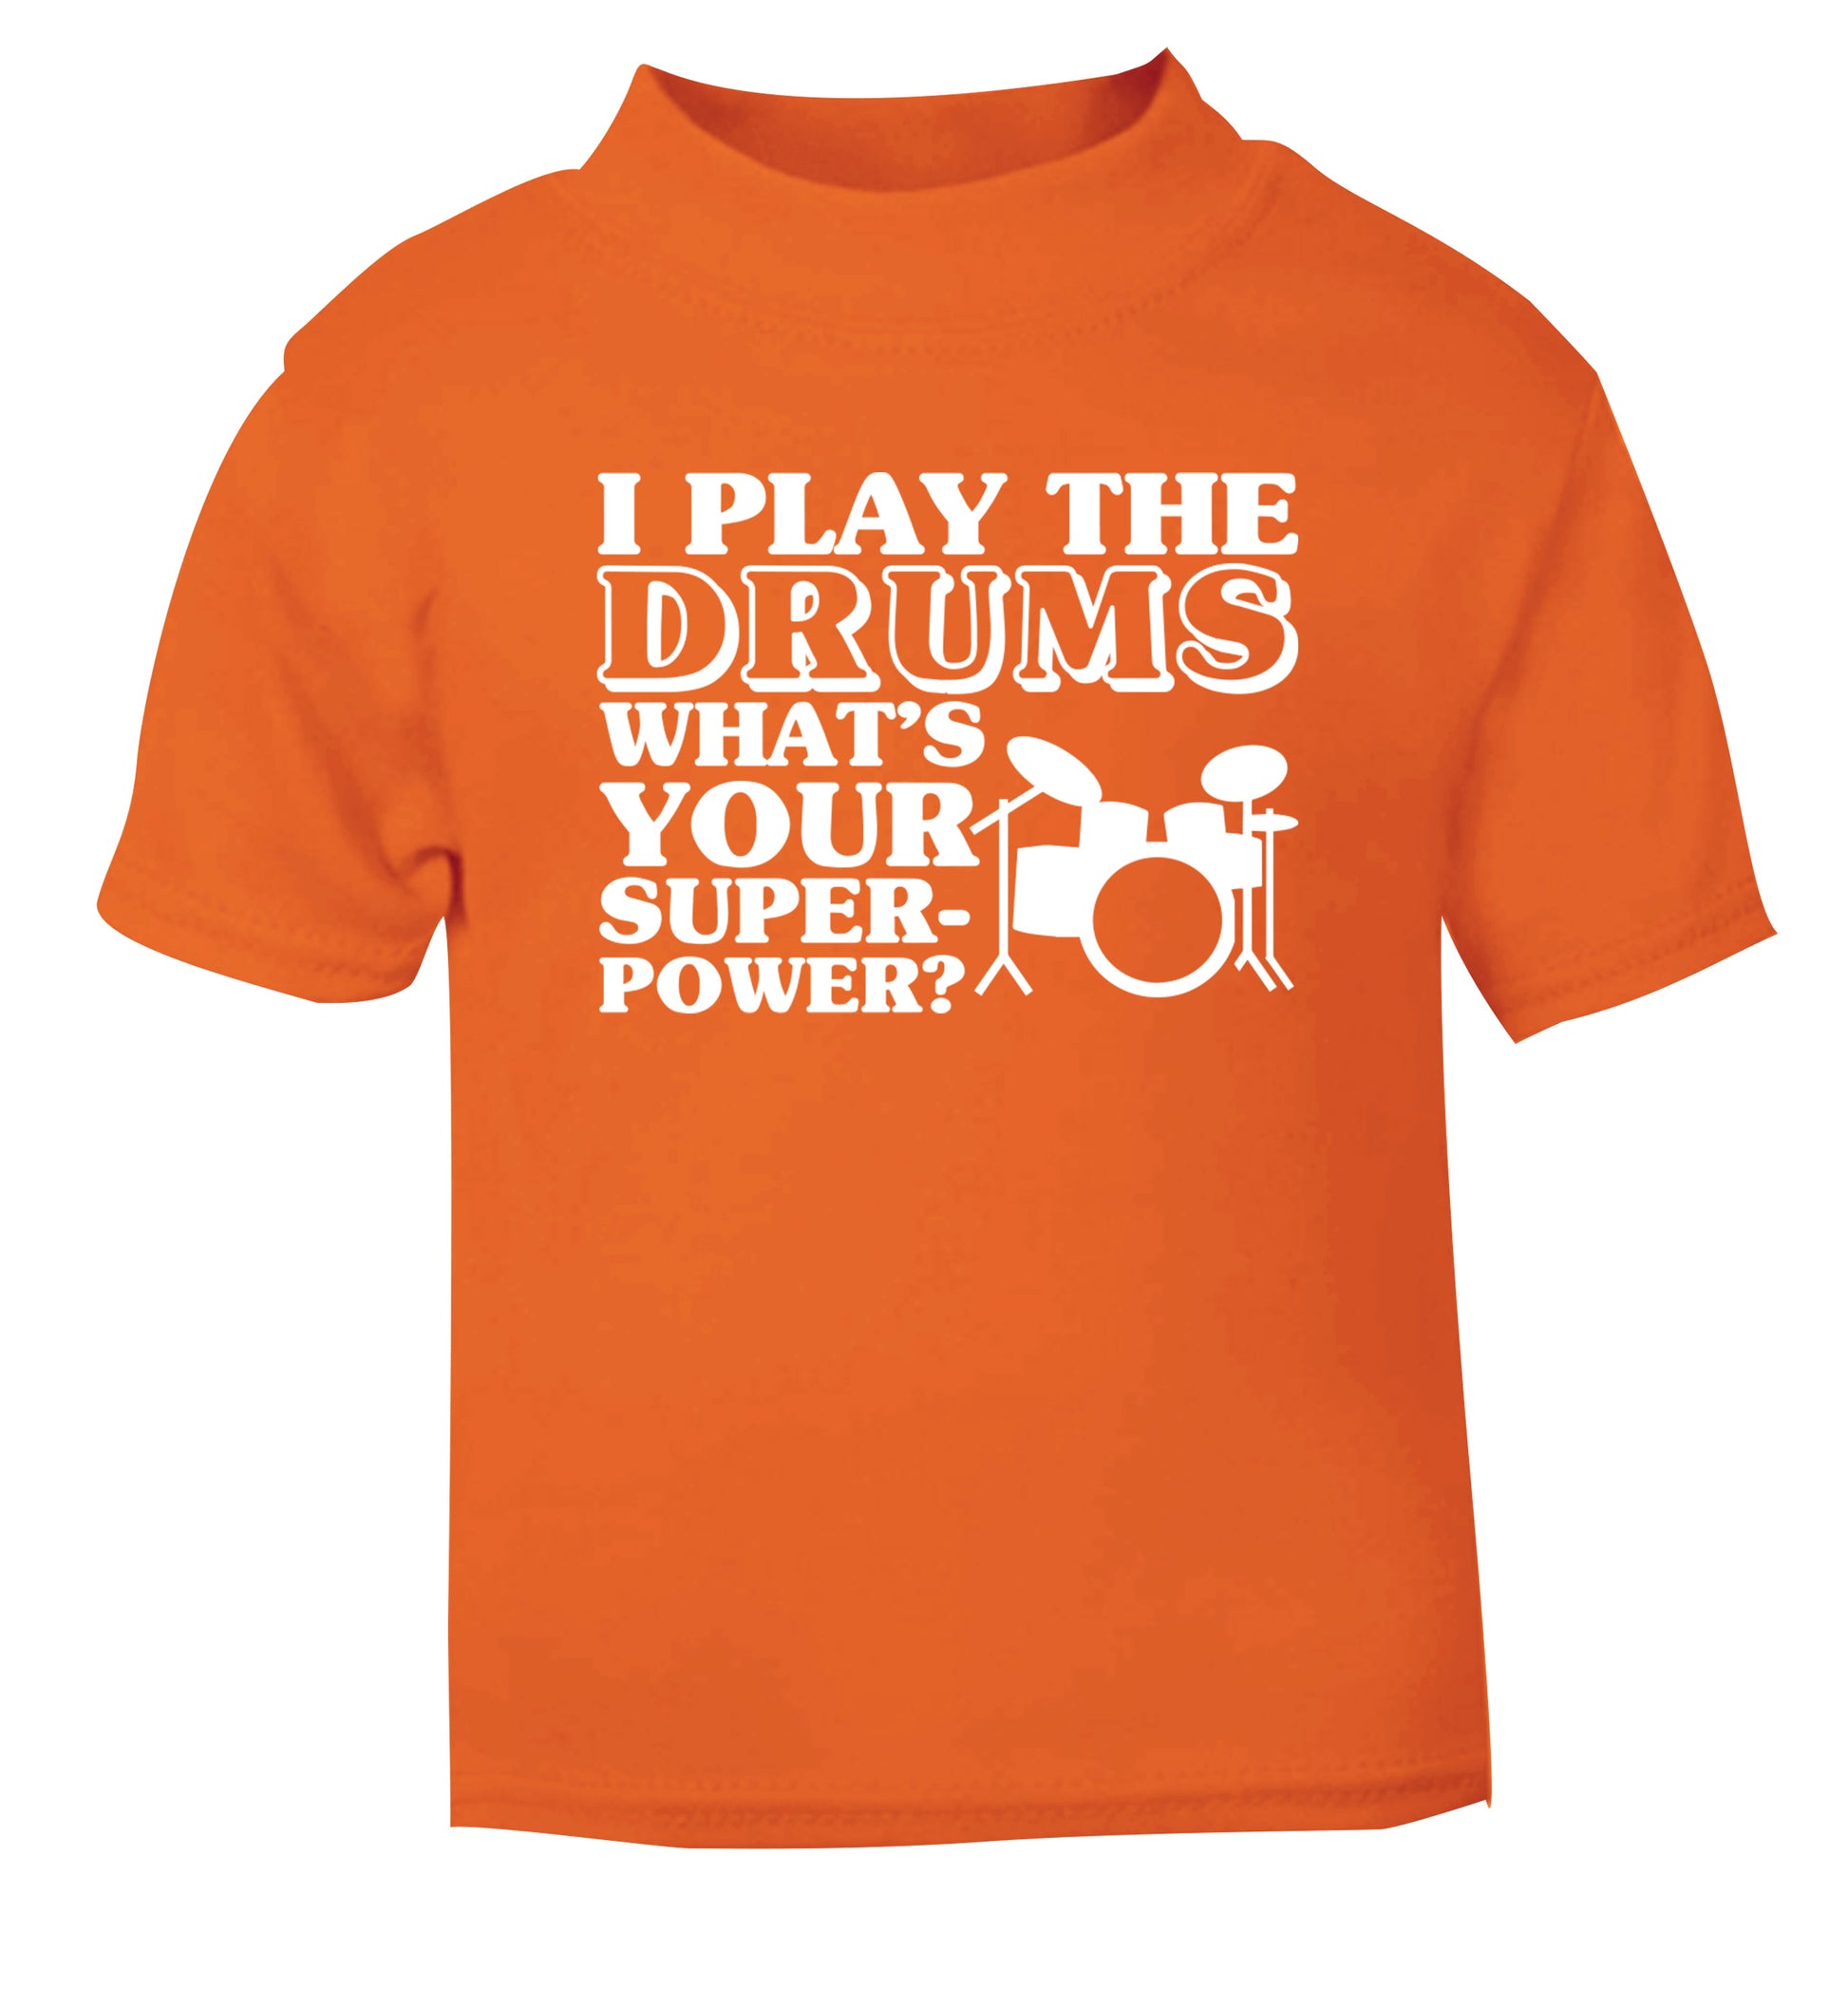 I play the drums what's your superpower? orange Baby Toddler Tshirt 2 Years